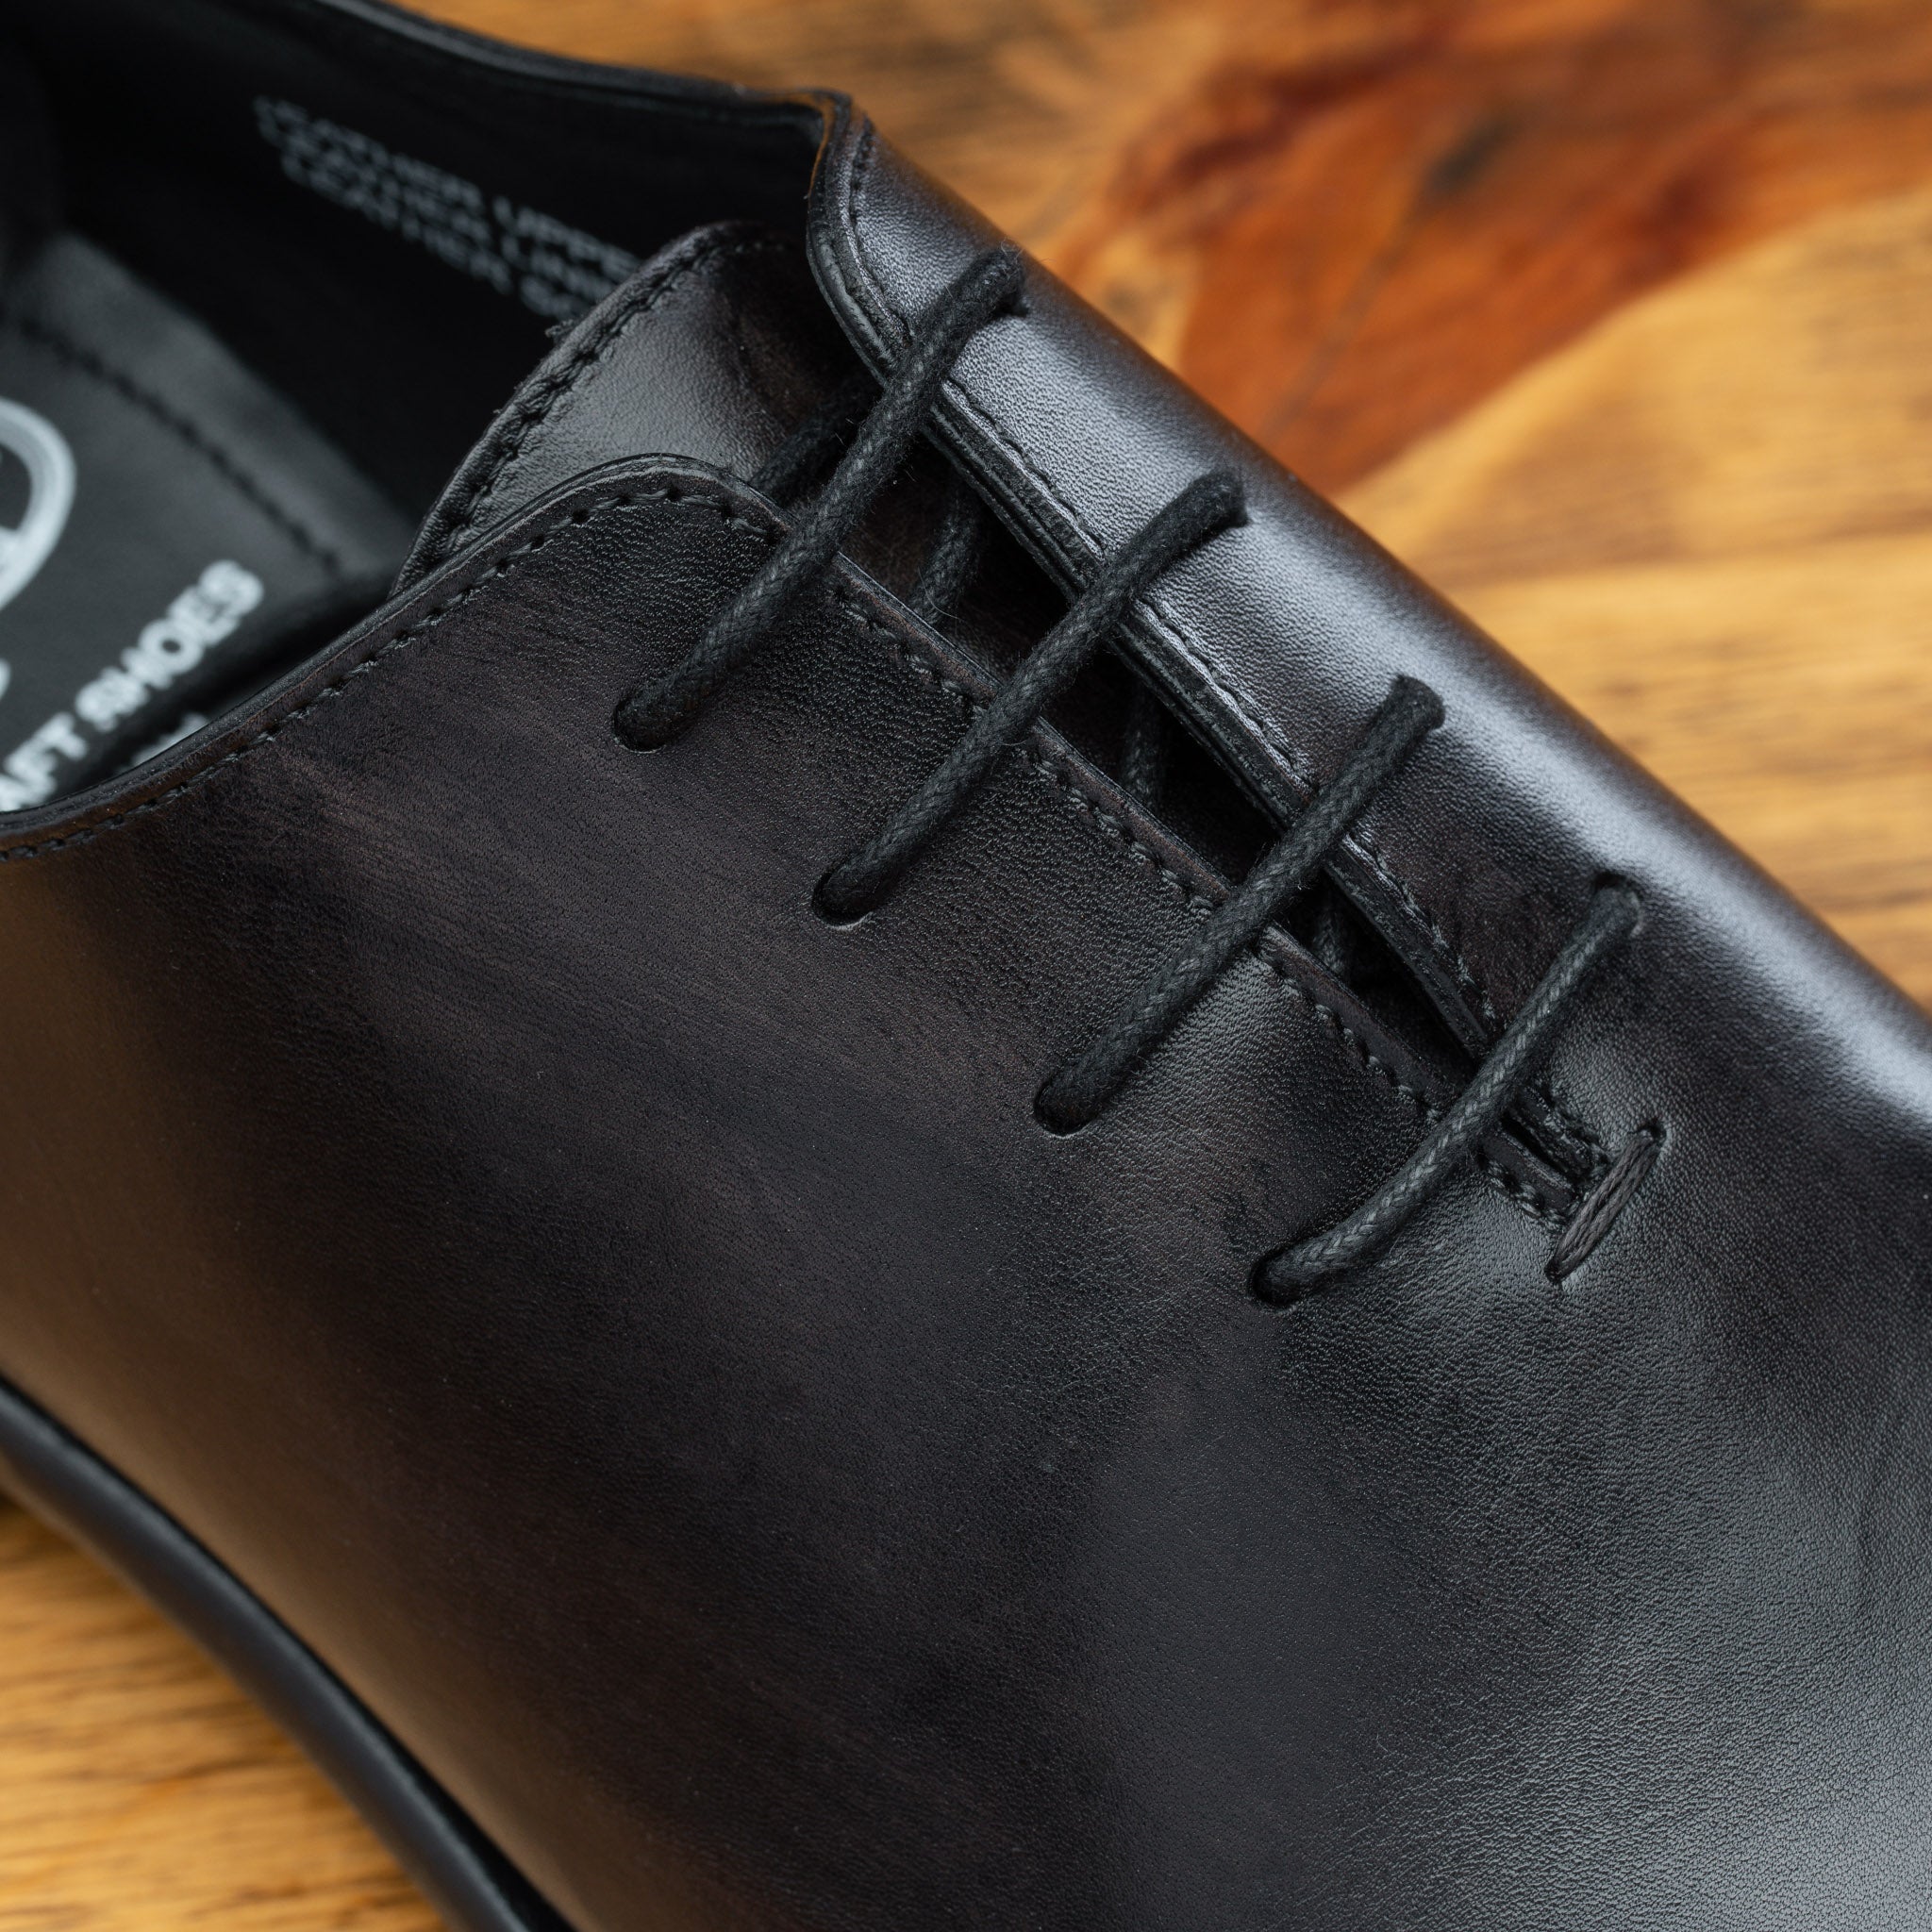 Up close picture of the 4 eyelet of Q550 Calzoleria Toscana Graphite Cayenne Calf Wholecut